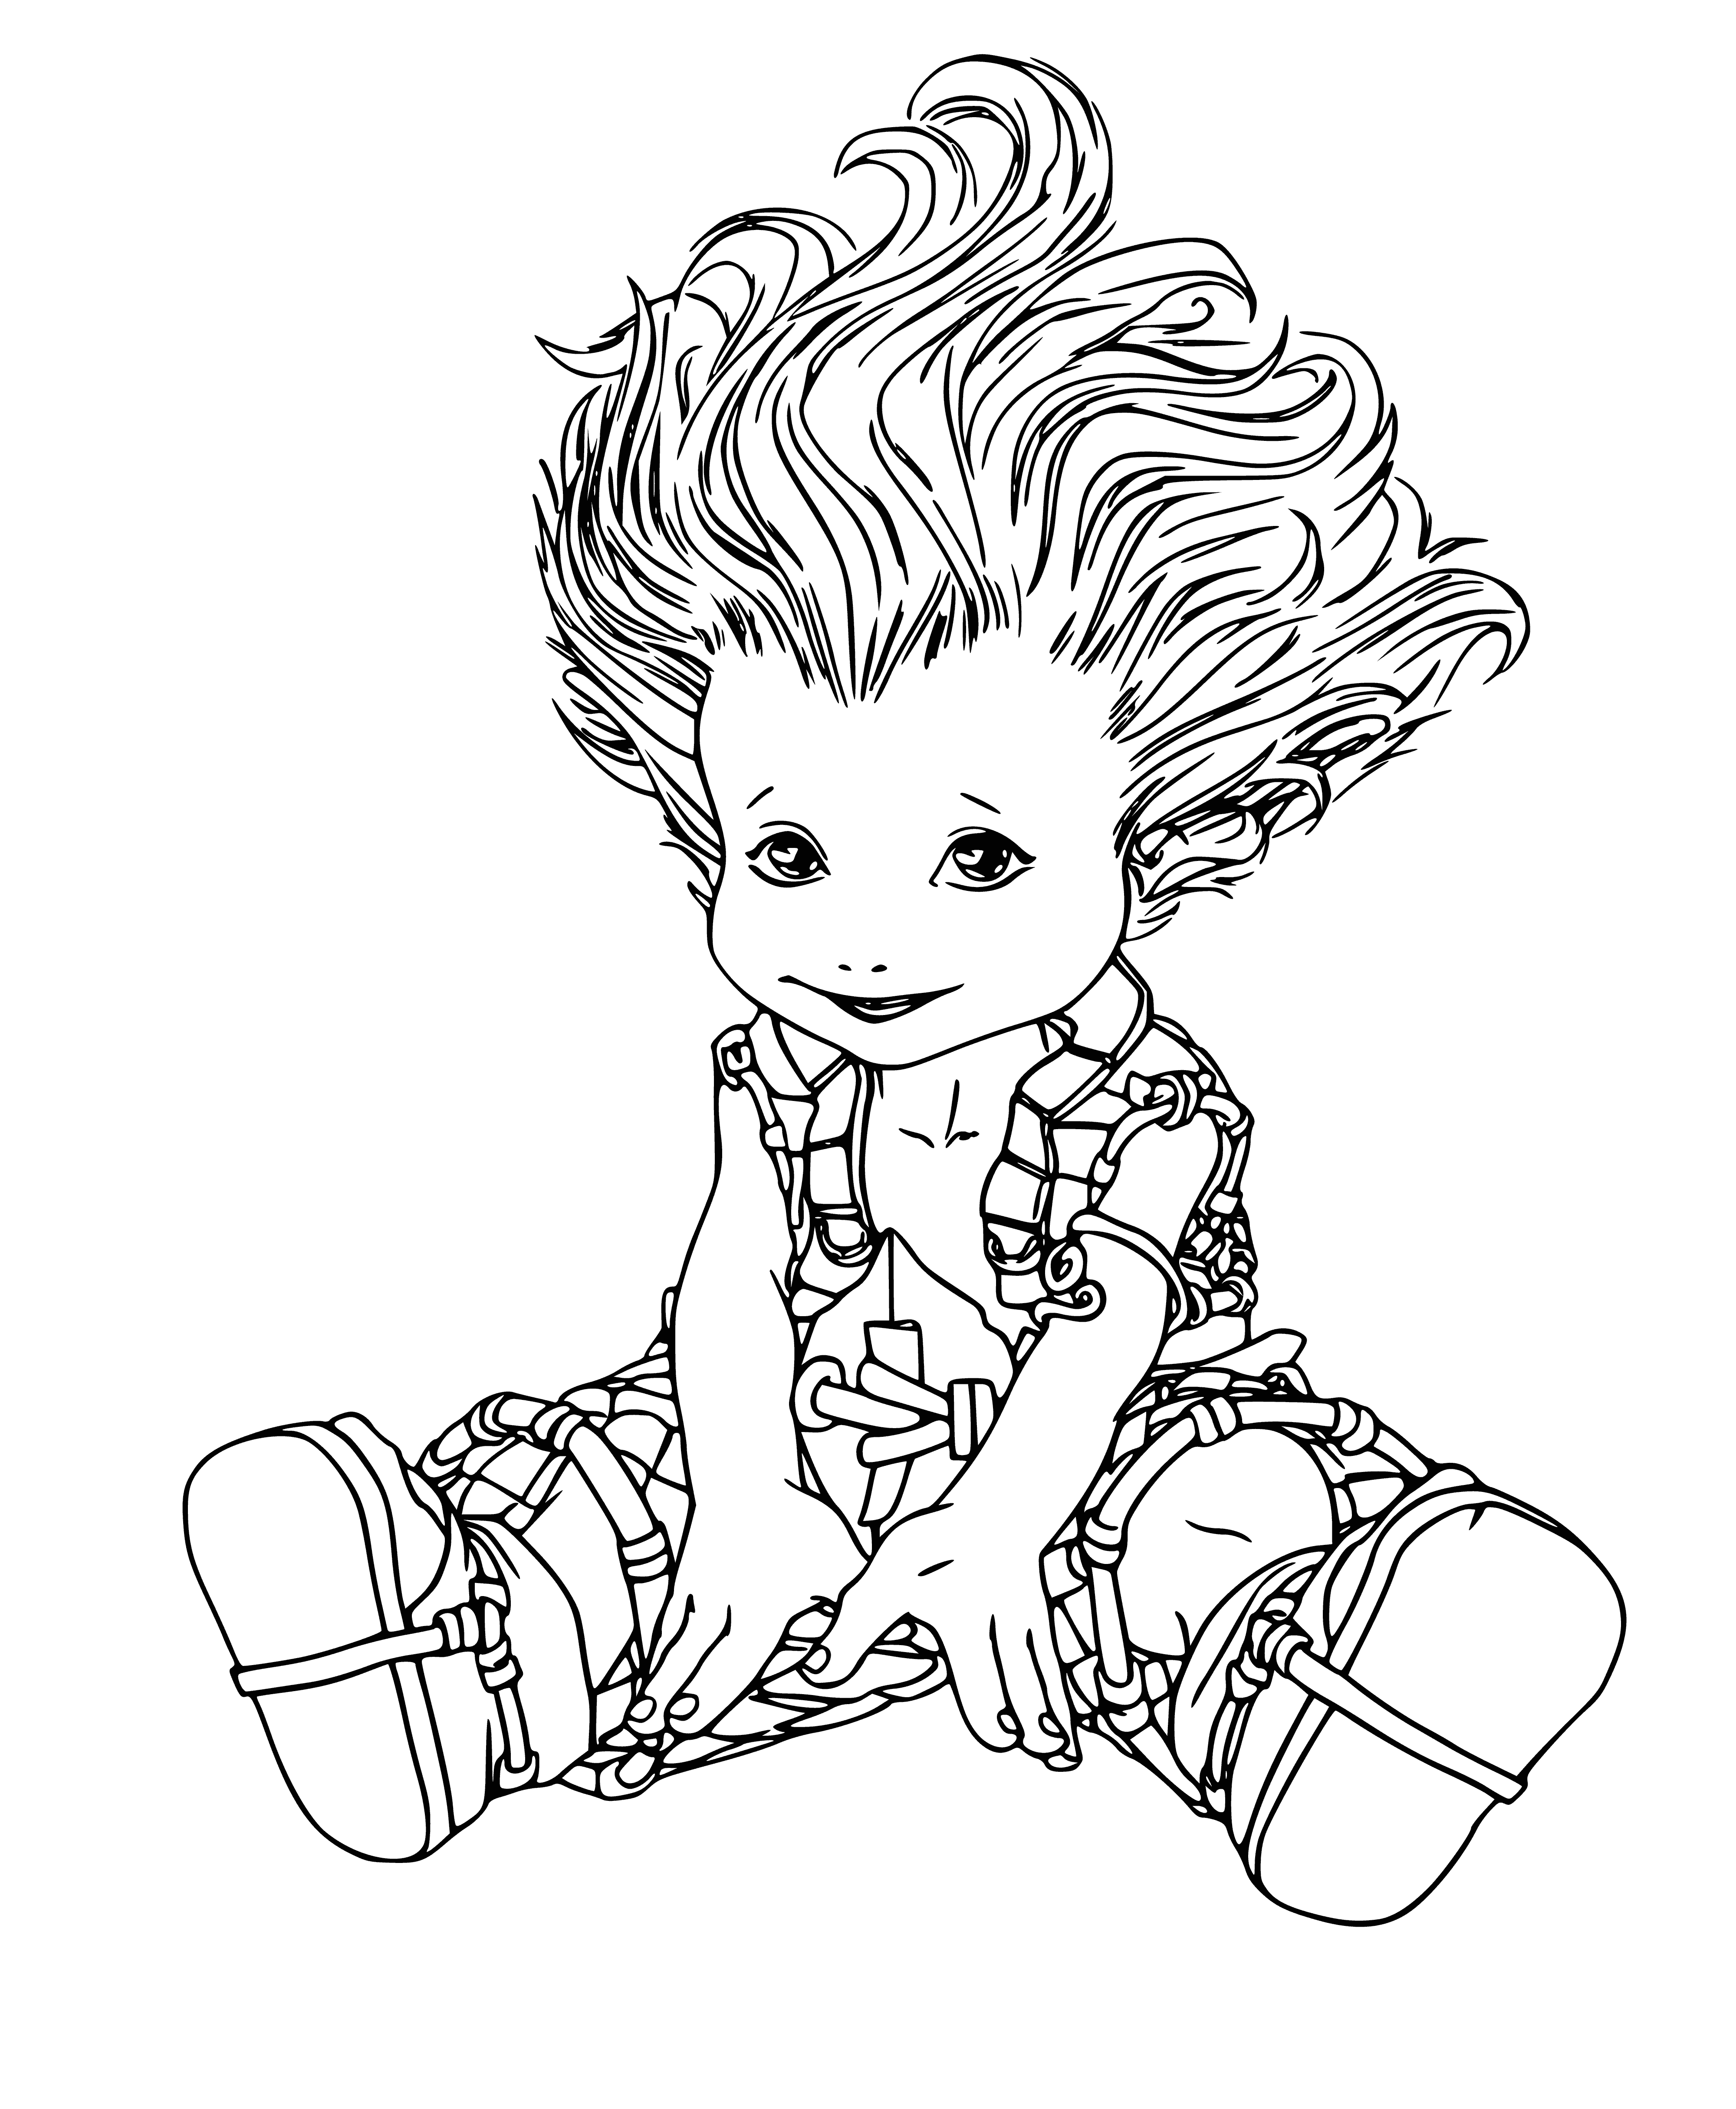 Selenia's brother coloring page